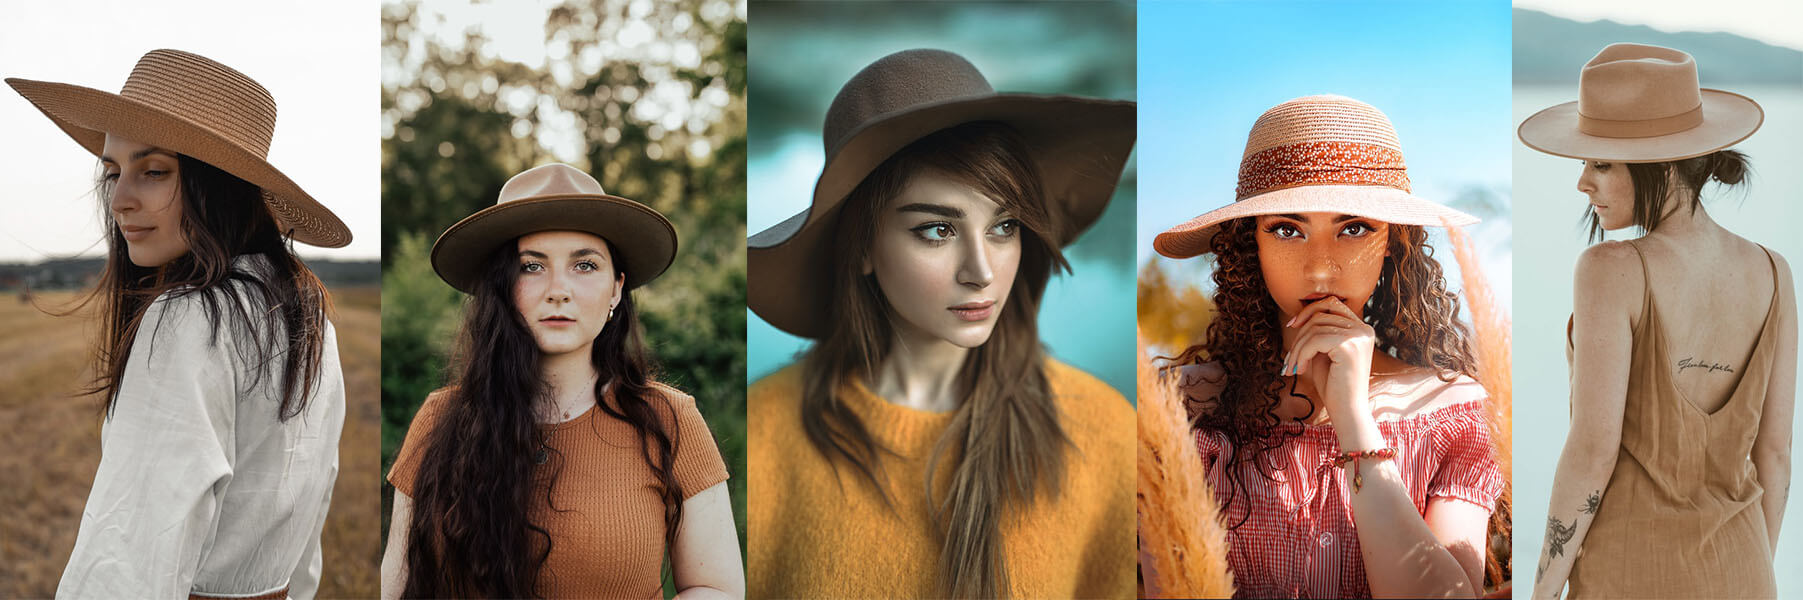 Hat photography with models